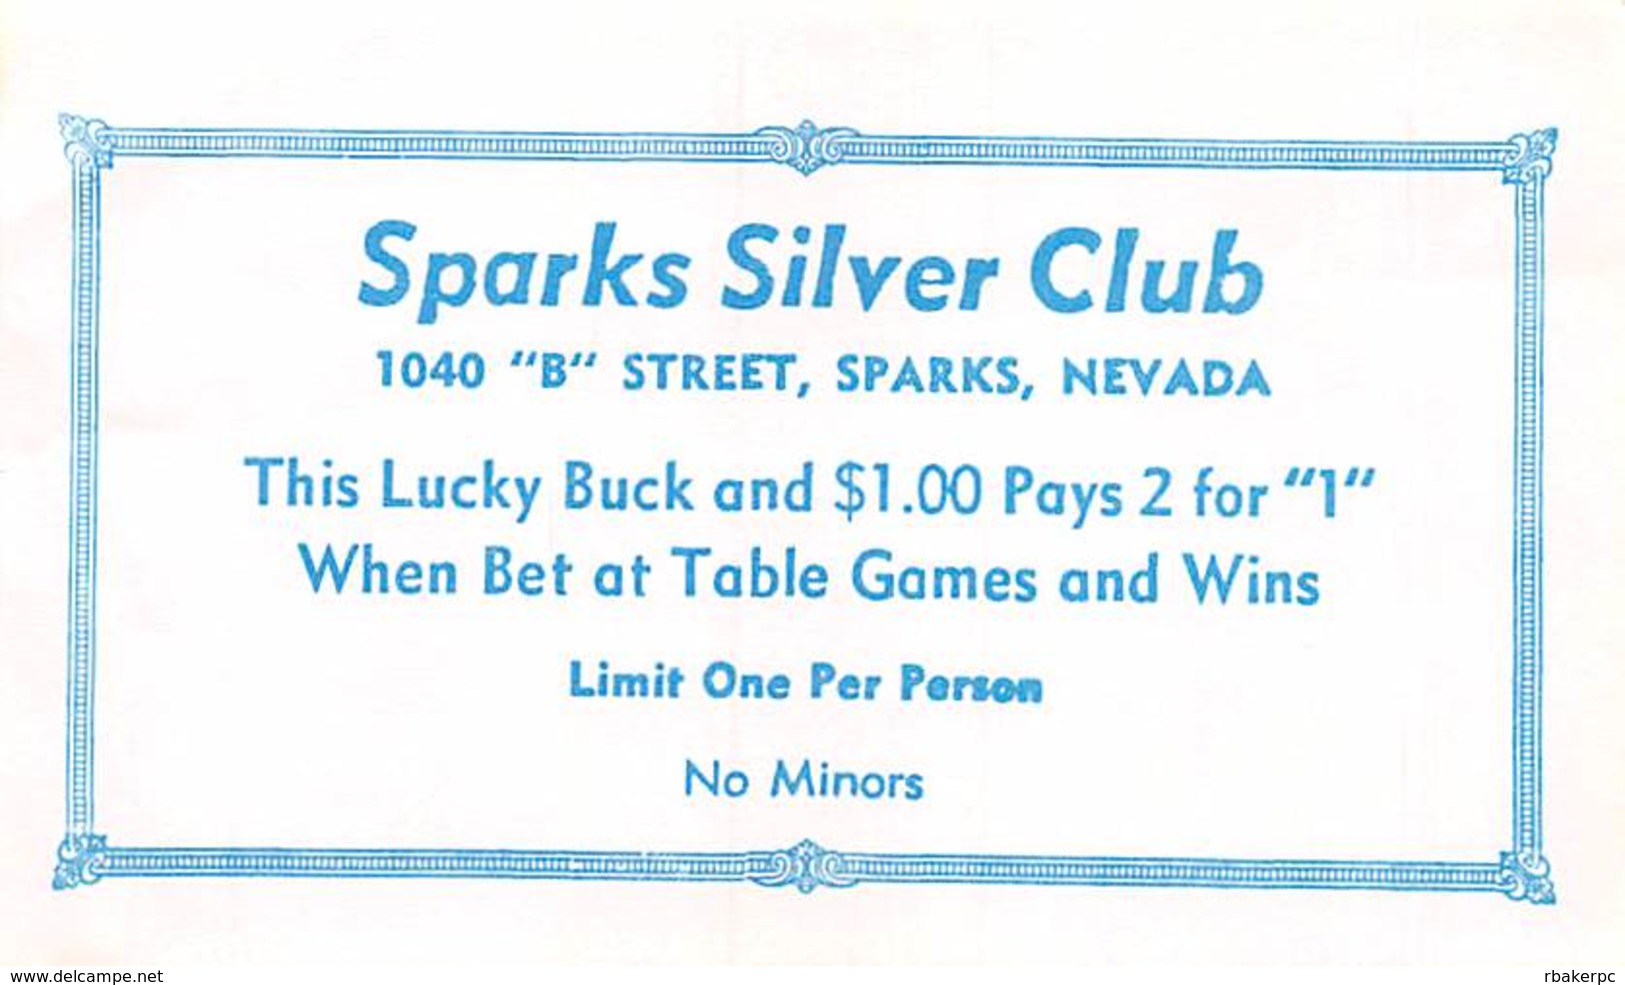 Sparks Silver Club / Casino - Sparks, NV - Lucky Buck Match Play Coupon (blank Reverse) - Advertising